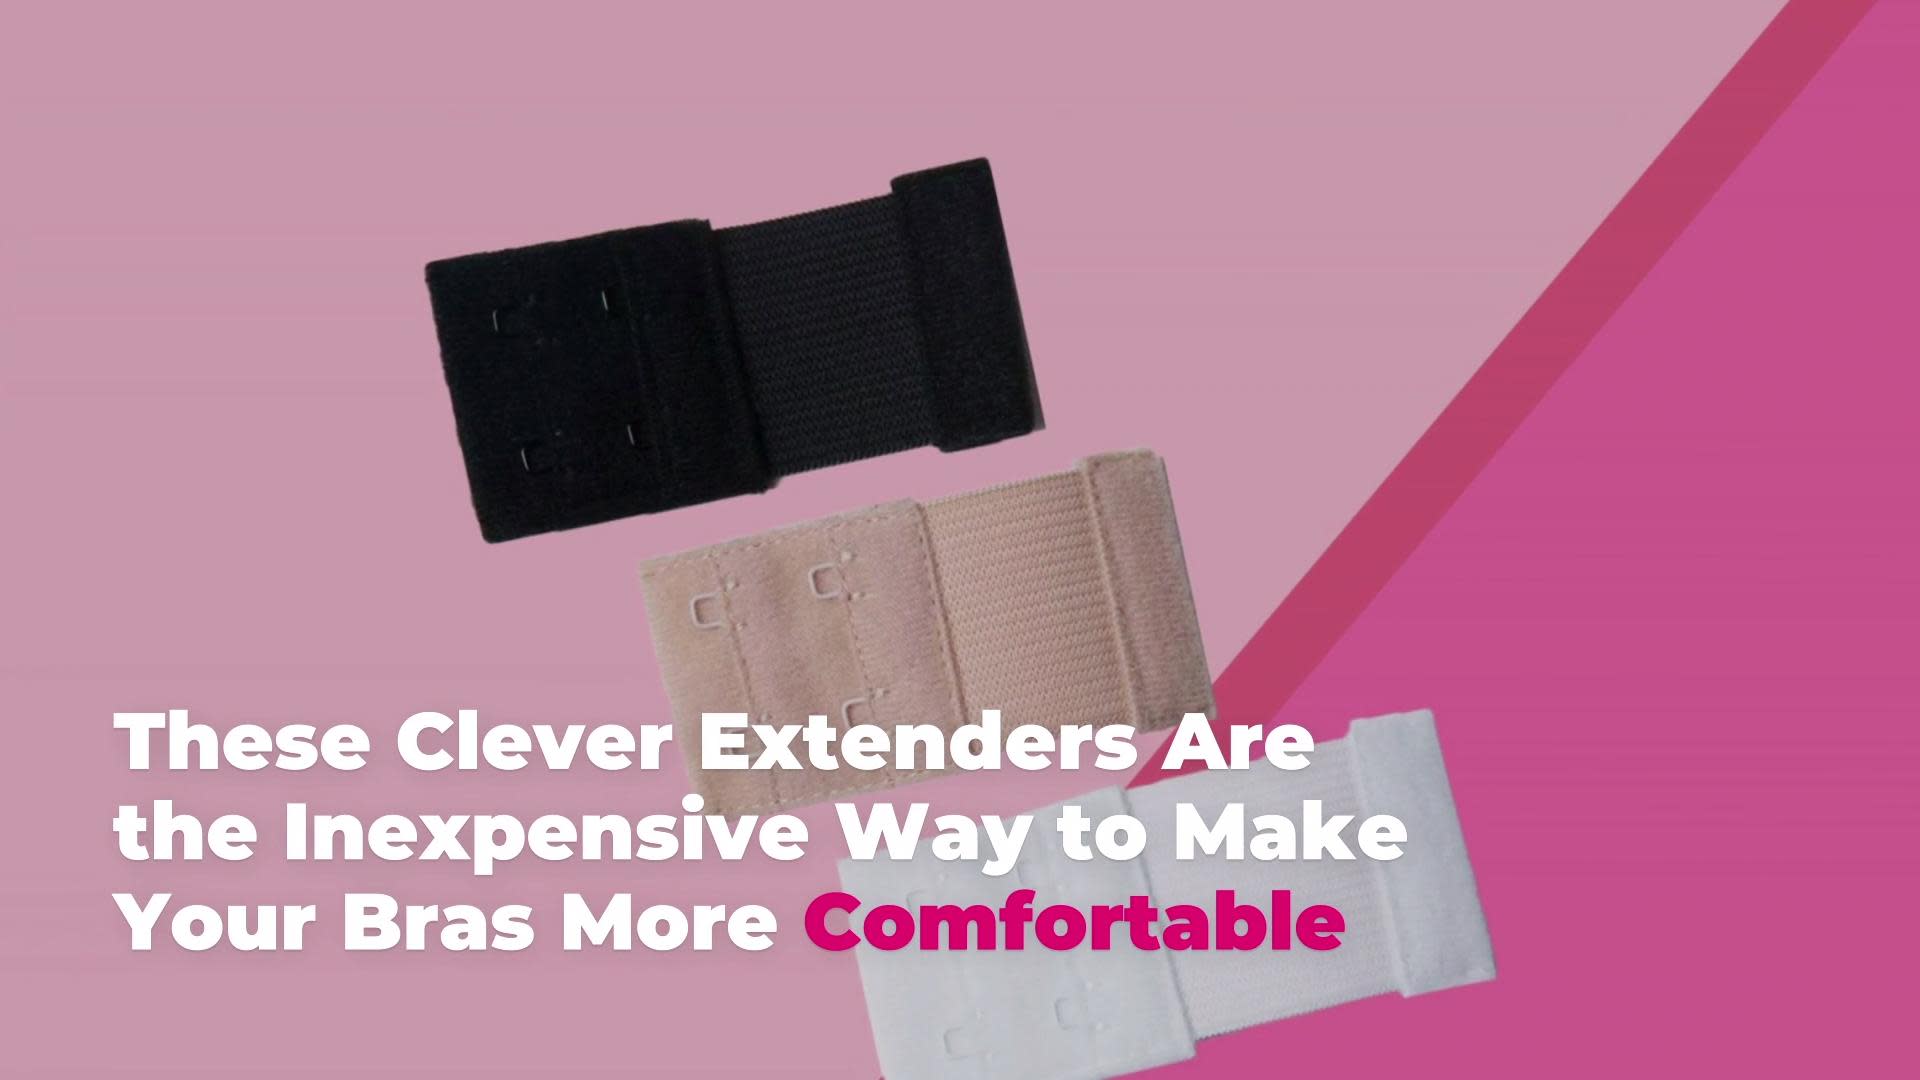 These Clever Extenders Are the Inexpensive Way to Make Your Bras